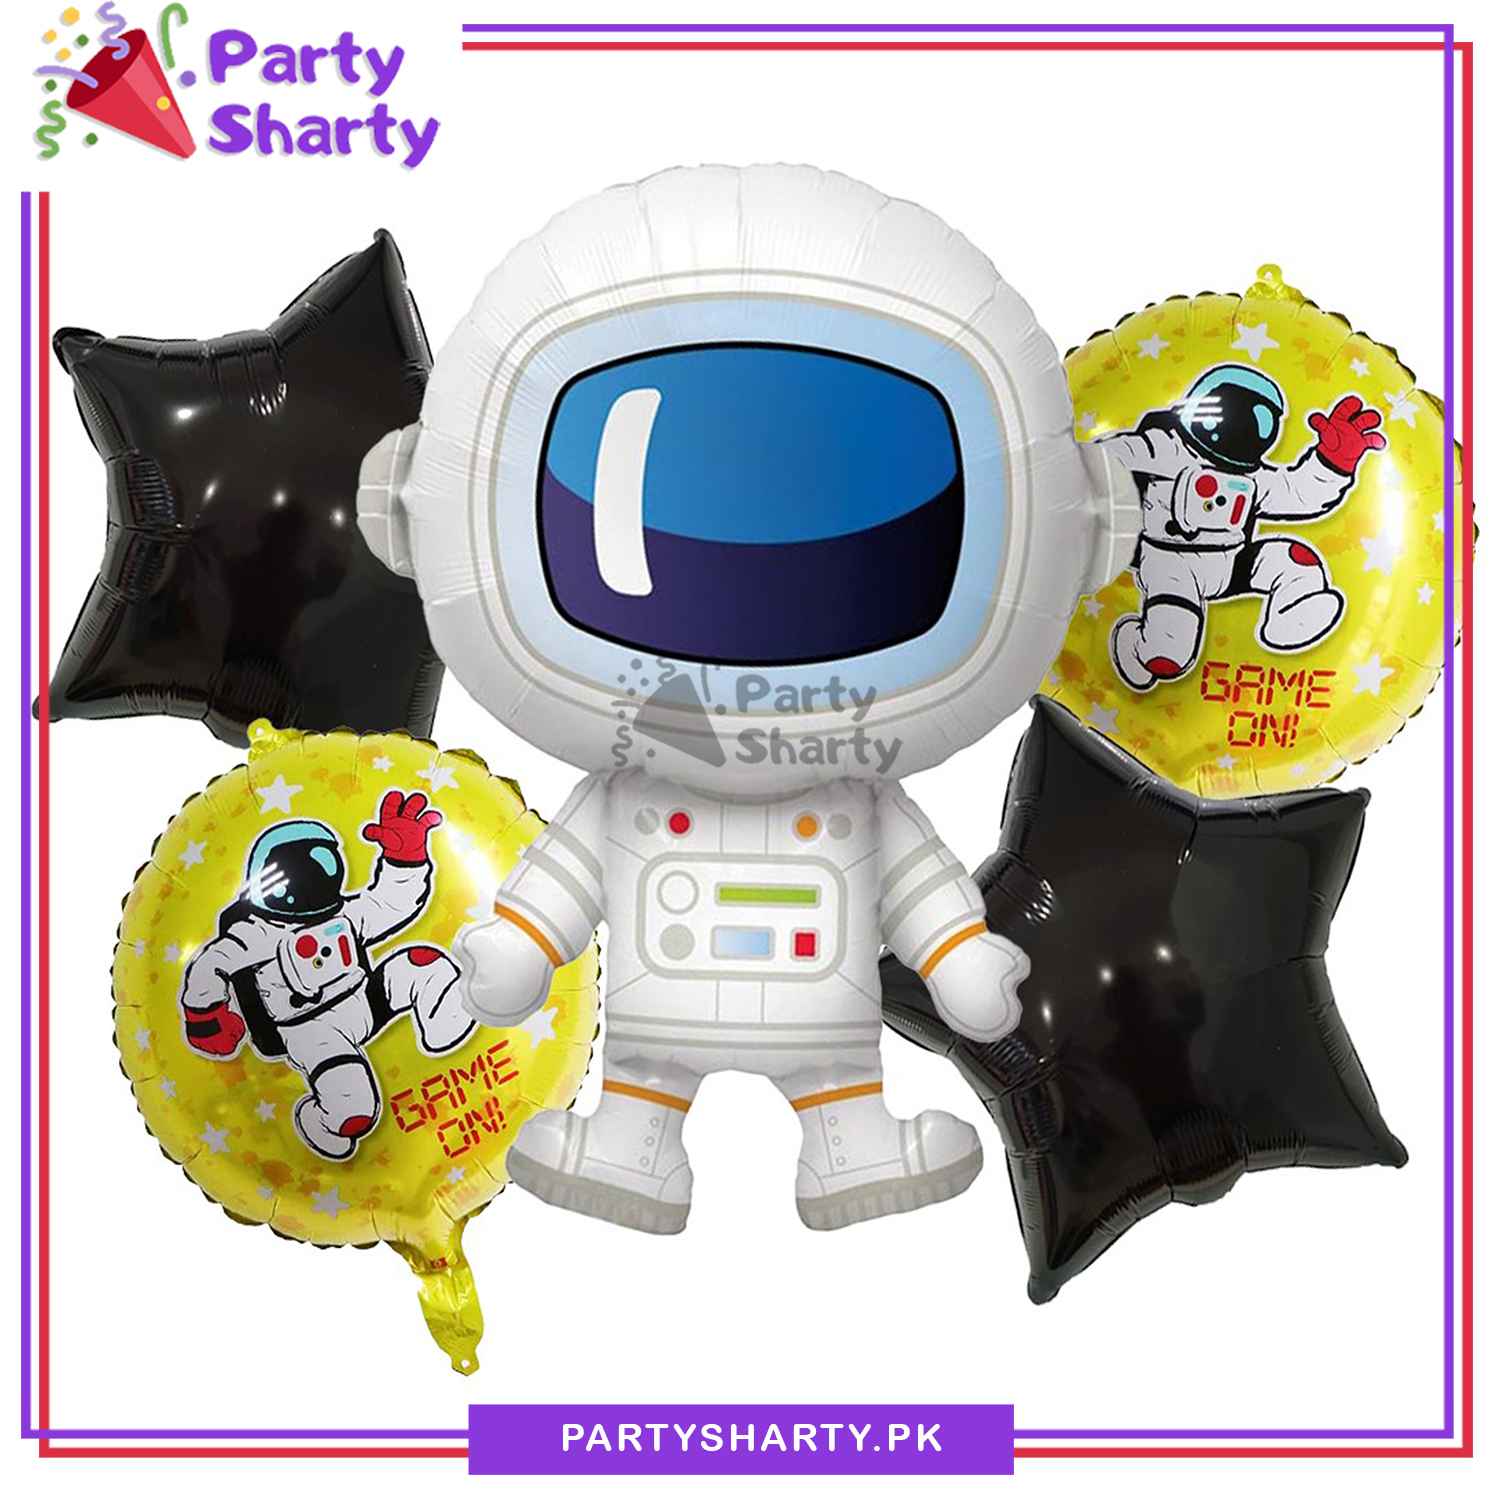 Astronaut / Spaceman Shaped Foil Balloon - Pack of 5 For Space Birthday Party Theme